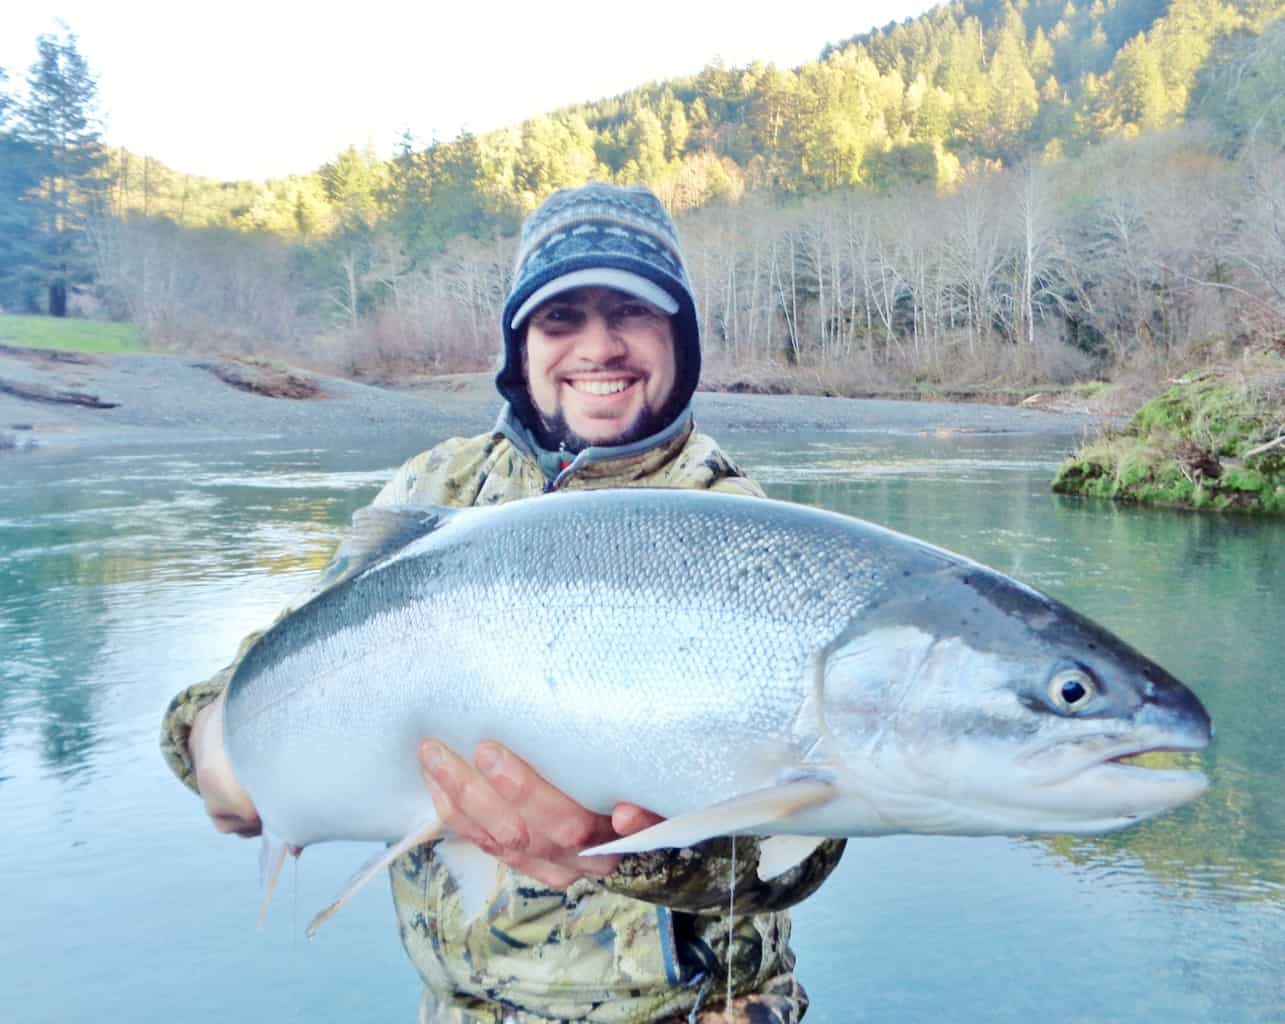 An angler holding a steelhead caught at upper sixes river.